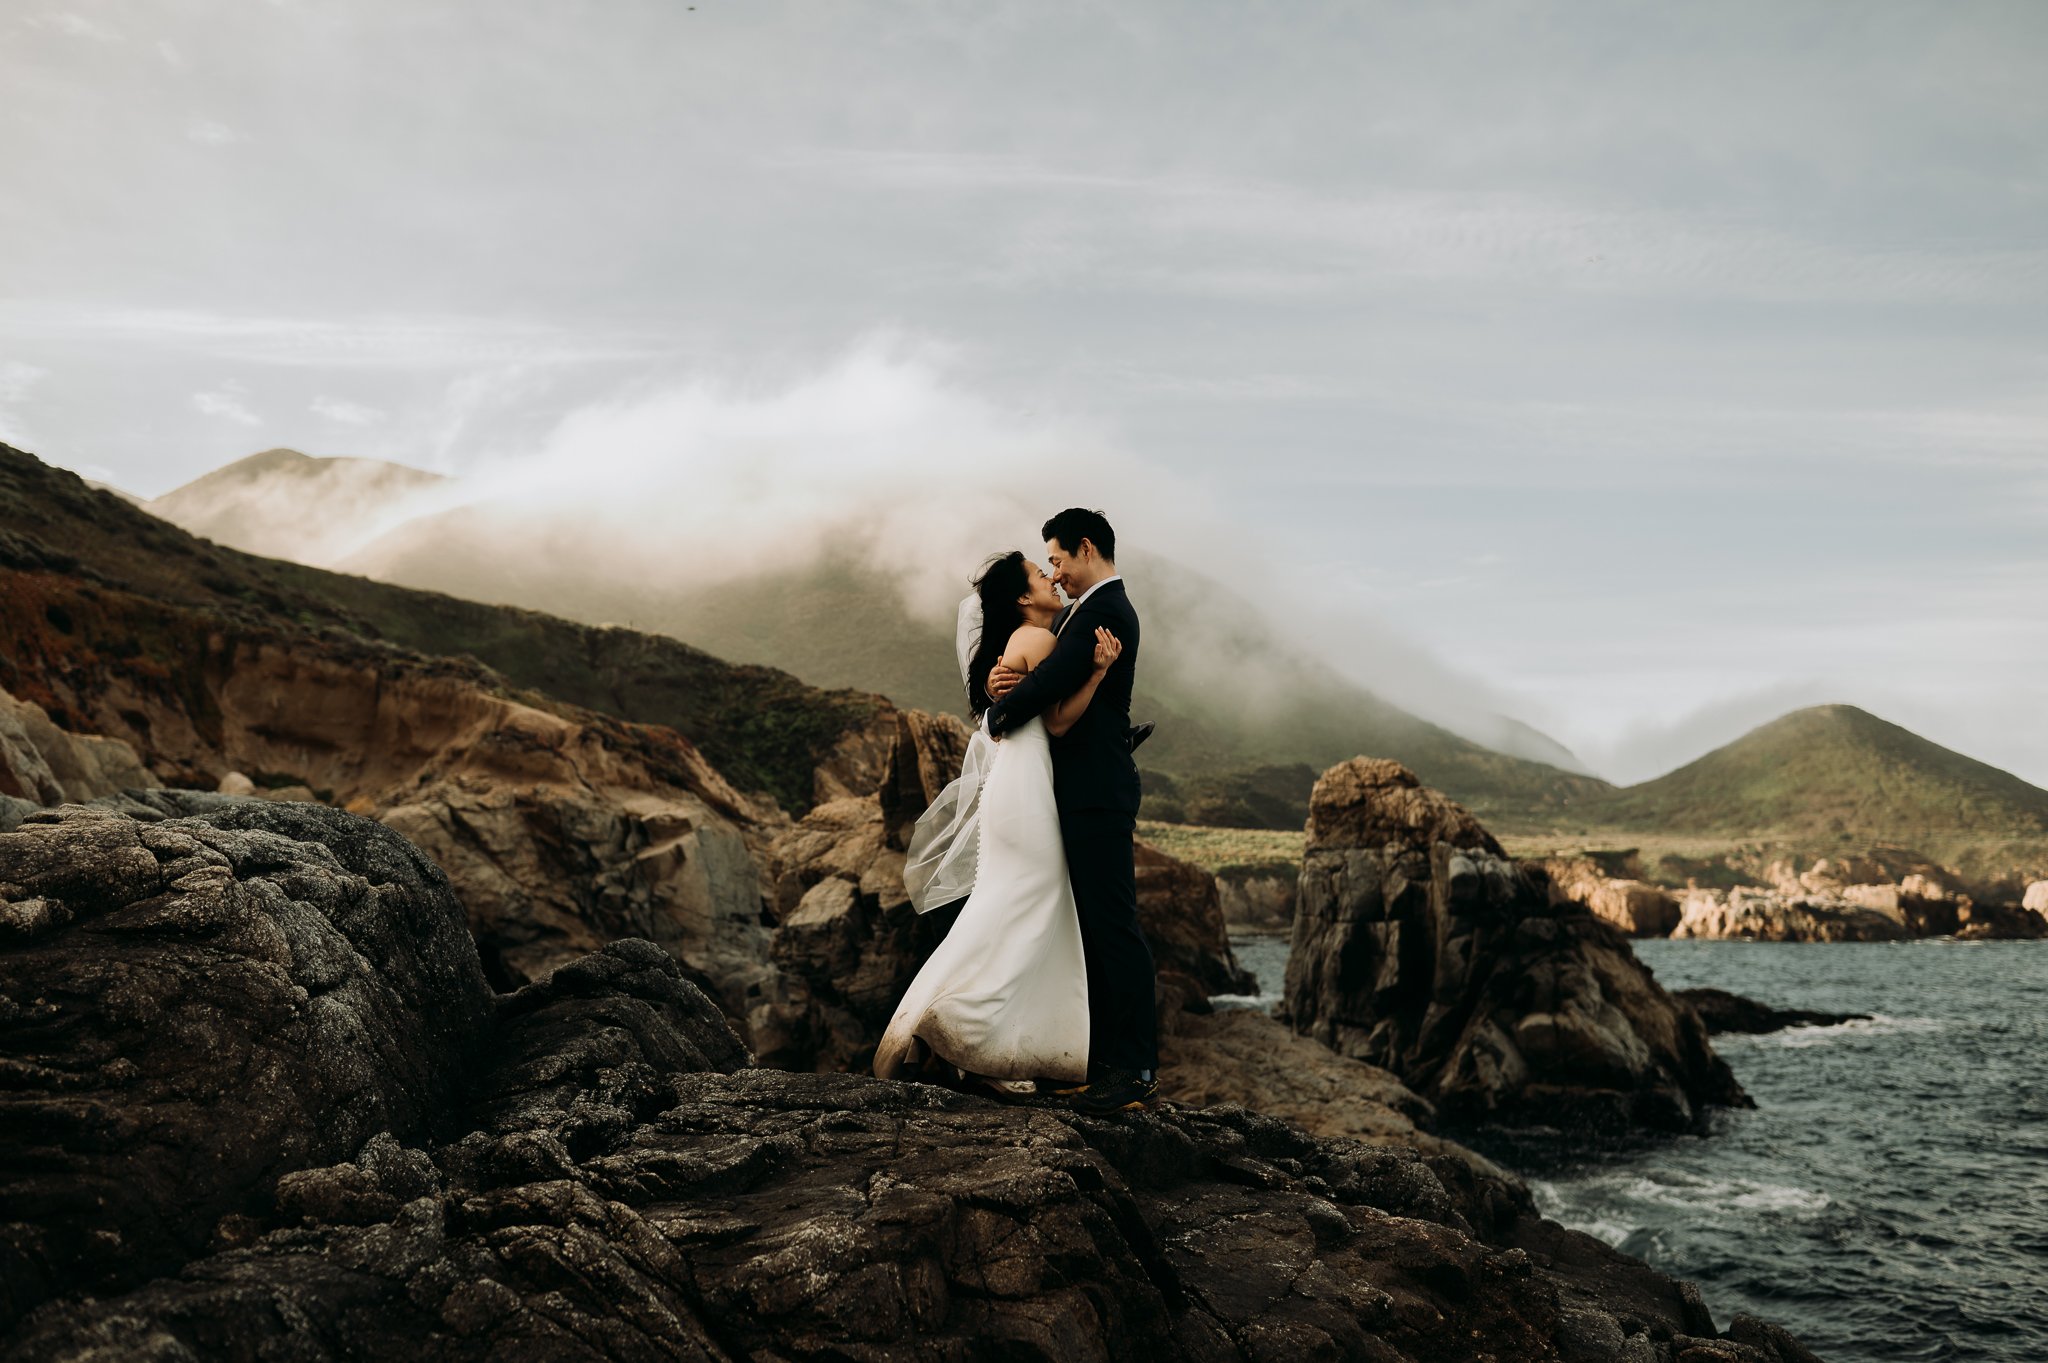 Elopement couple in wedding attire hugging on cliff in with ocean and fog drenched hills Big Sur California